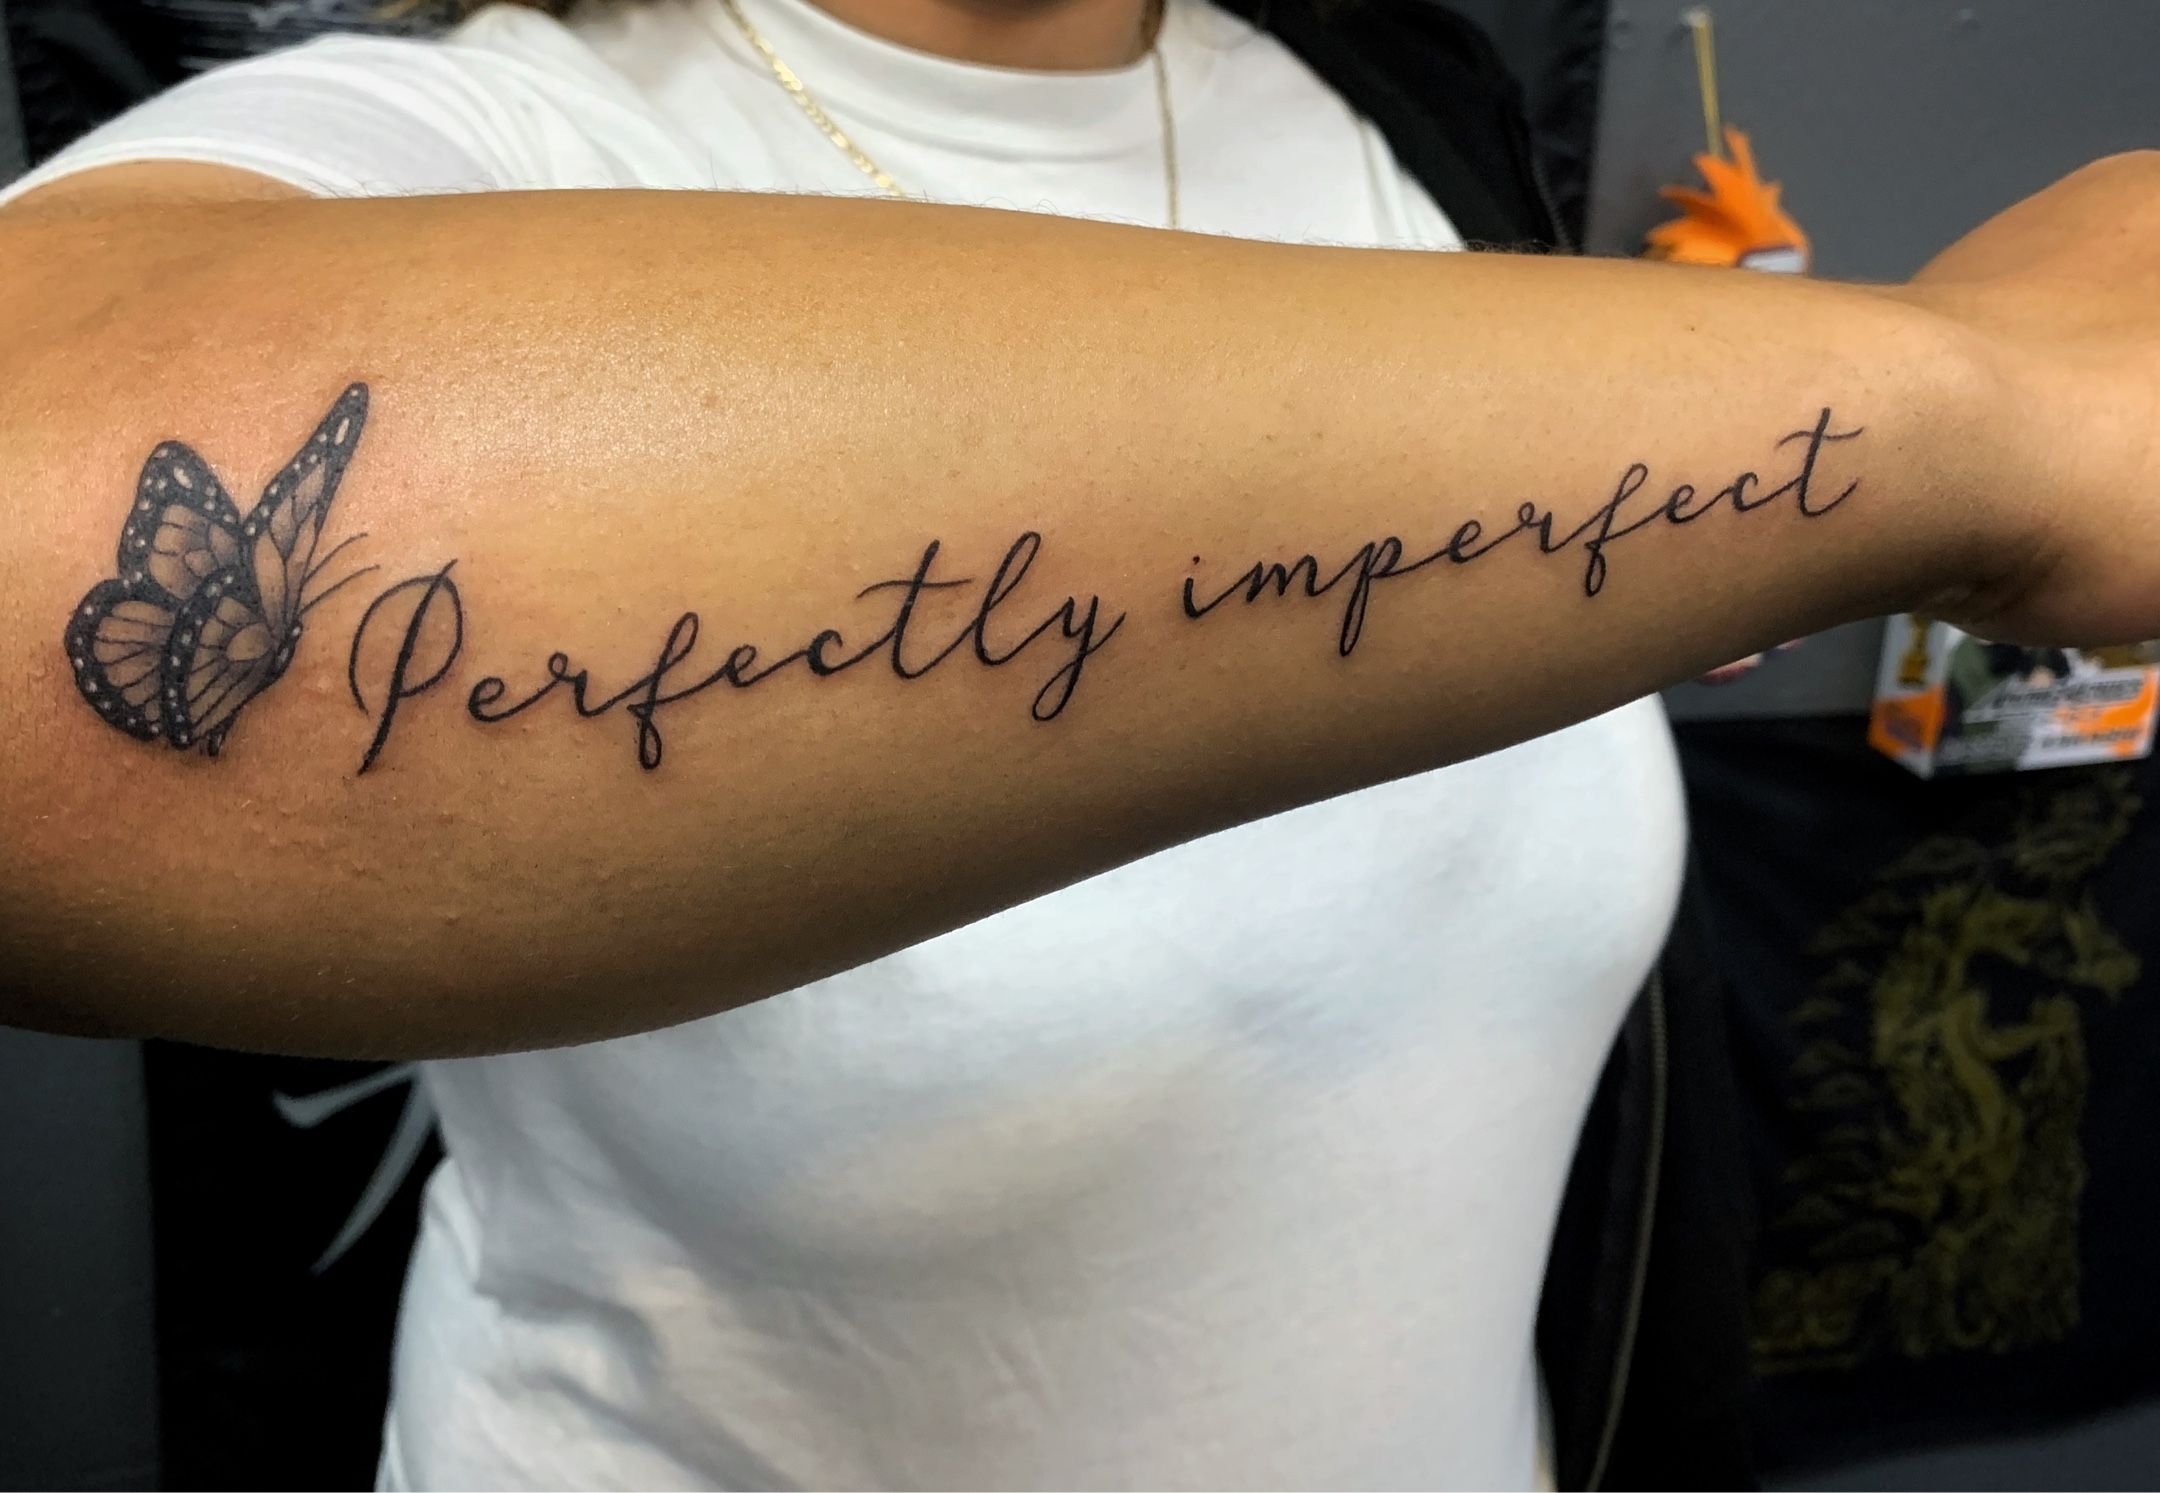 Perfectly Imperfect Tattoos Symbolism Meanings  More